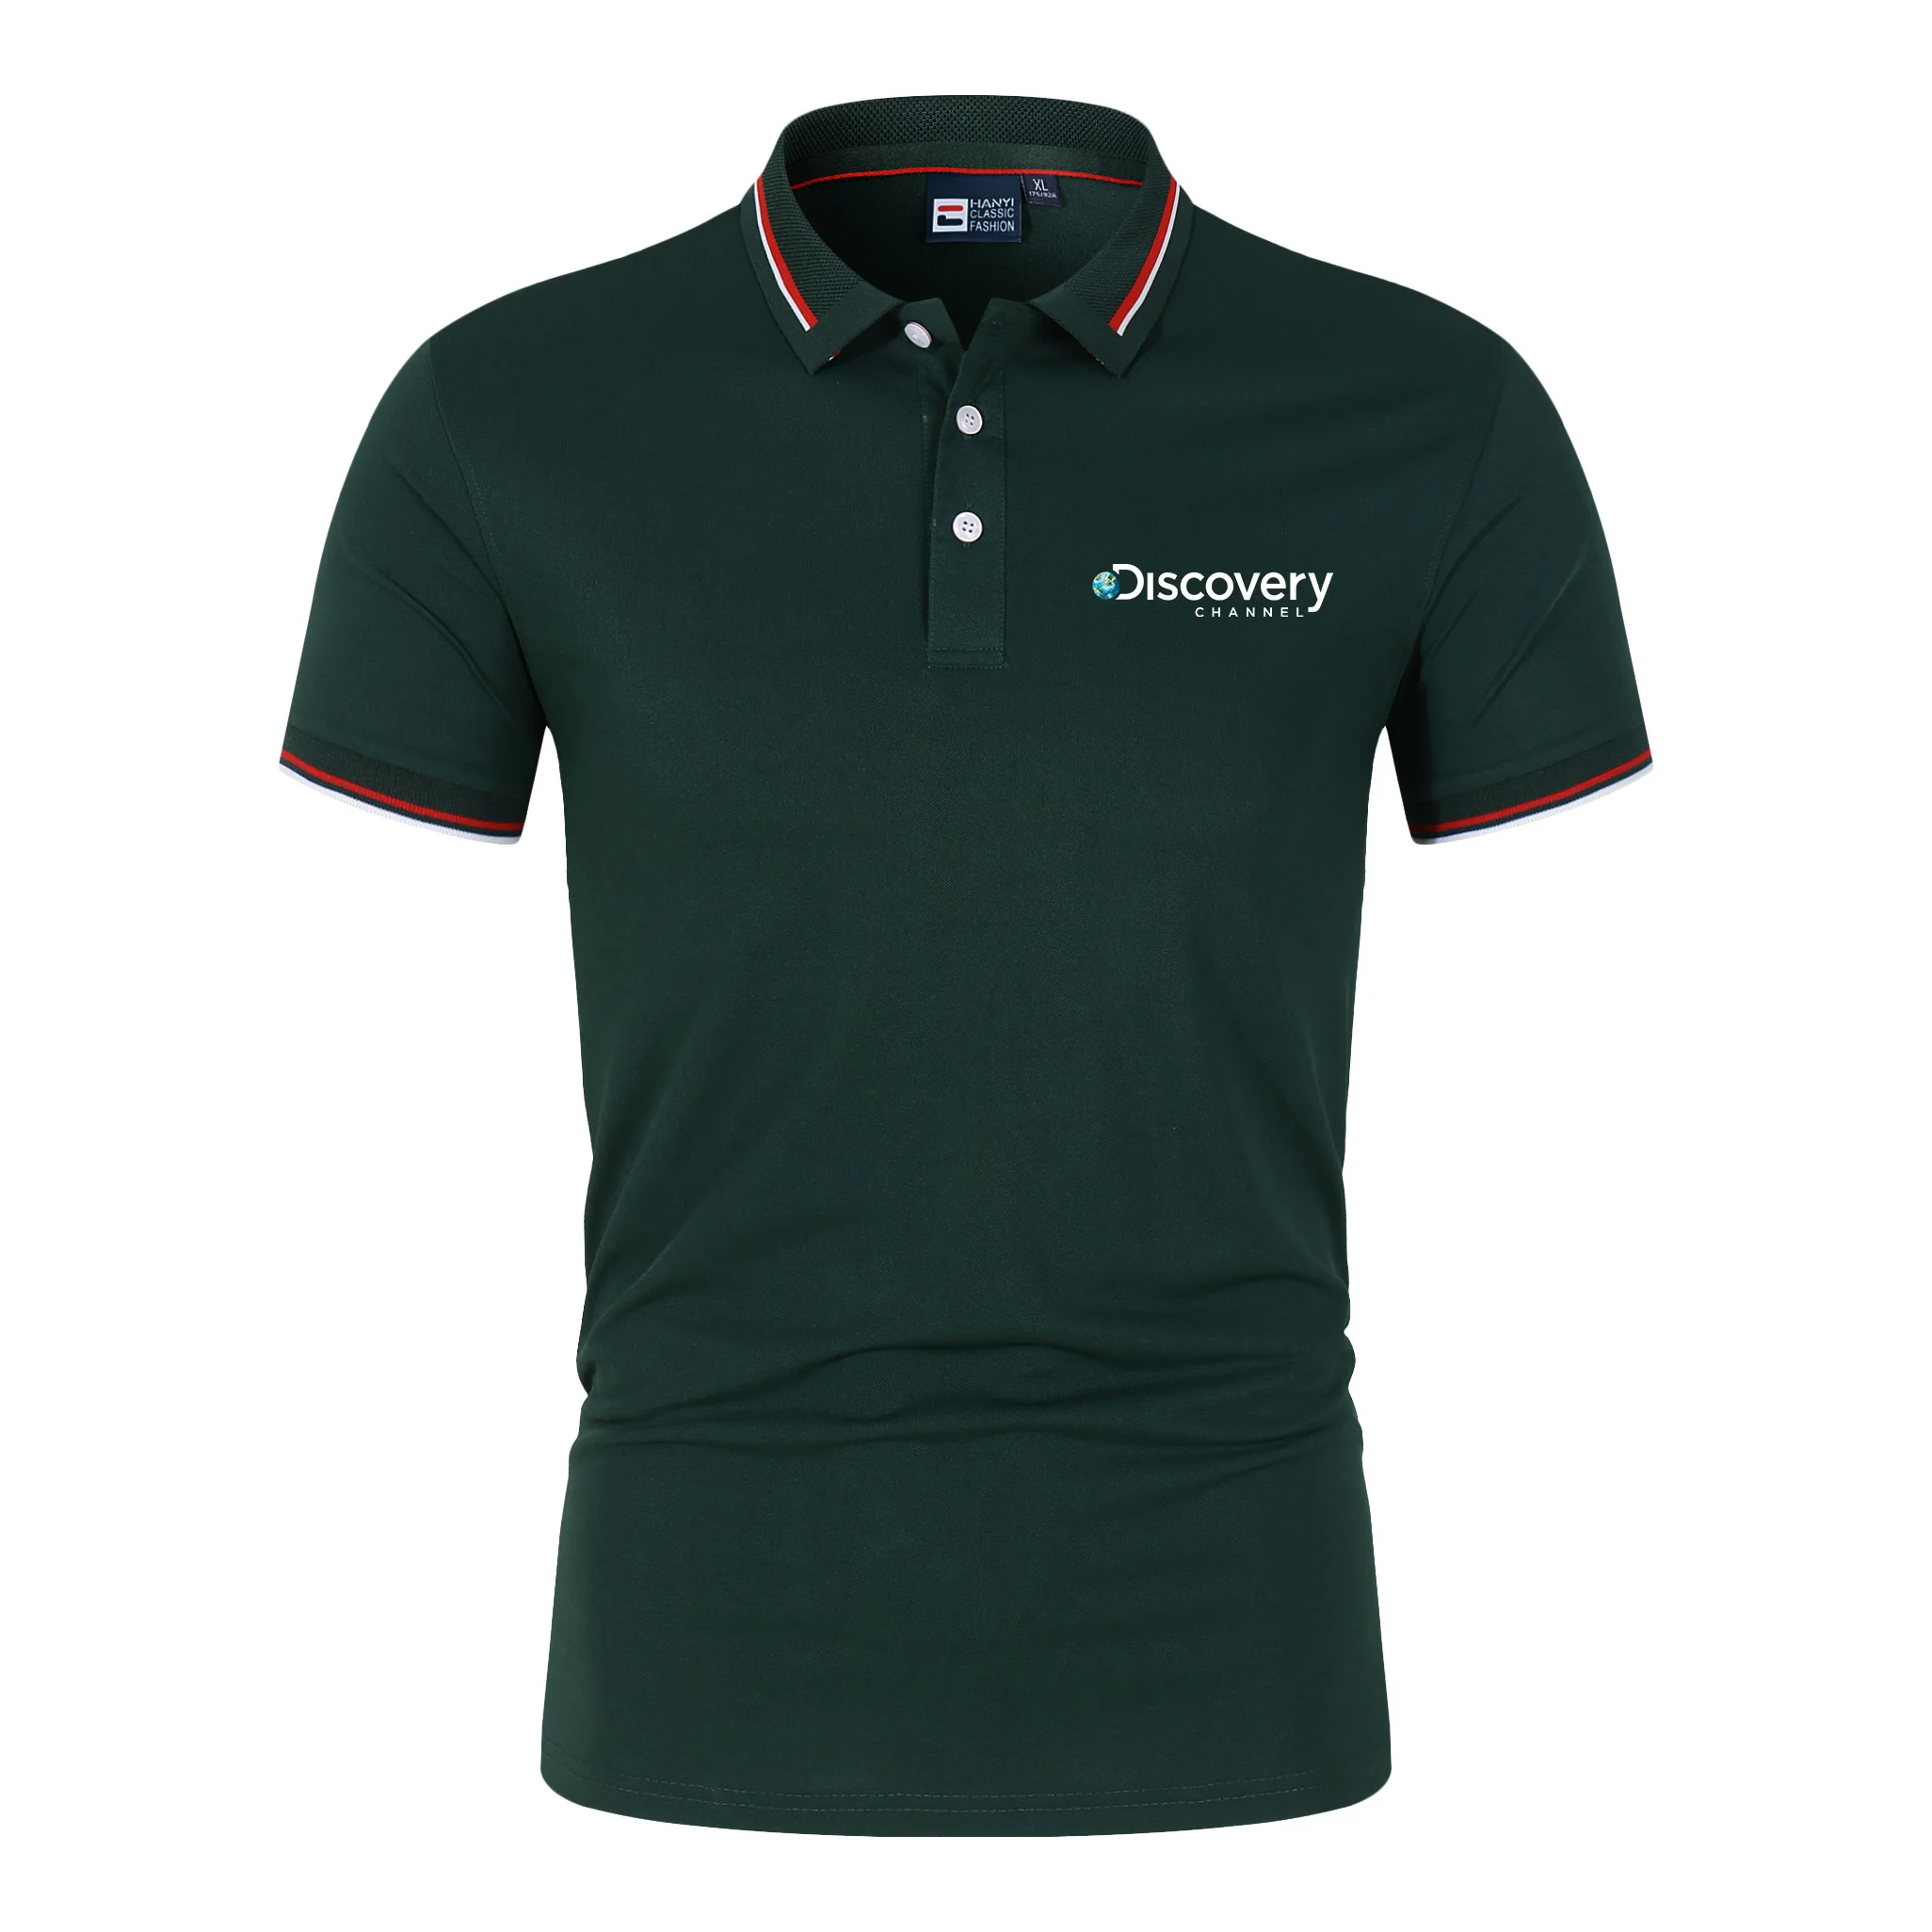 

Men's Polo T-shirt High Quality Discovery Golf Polos Classic Sports Breathable Short Sleeve Top Brand Men's Business Wear